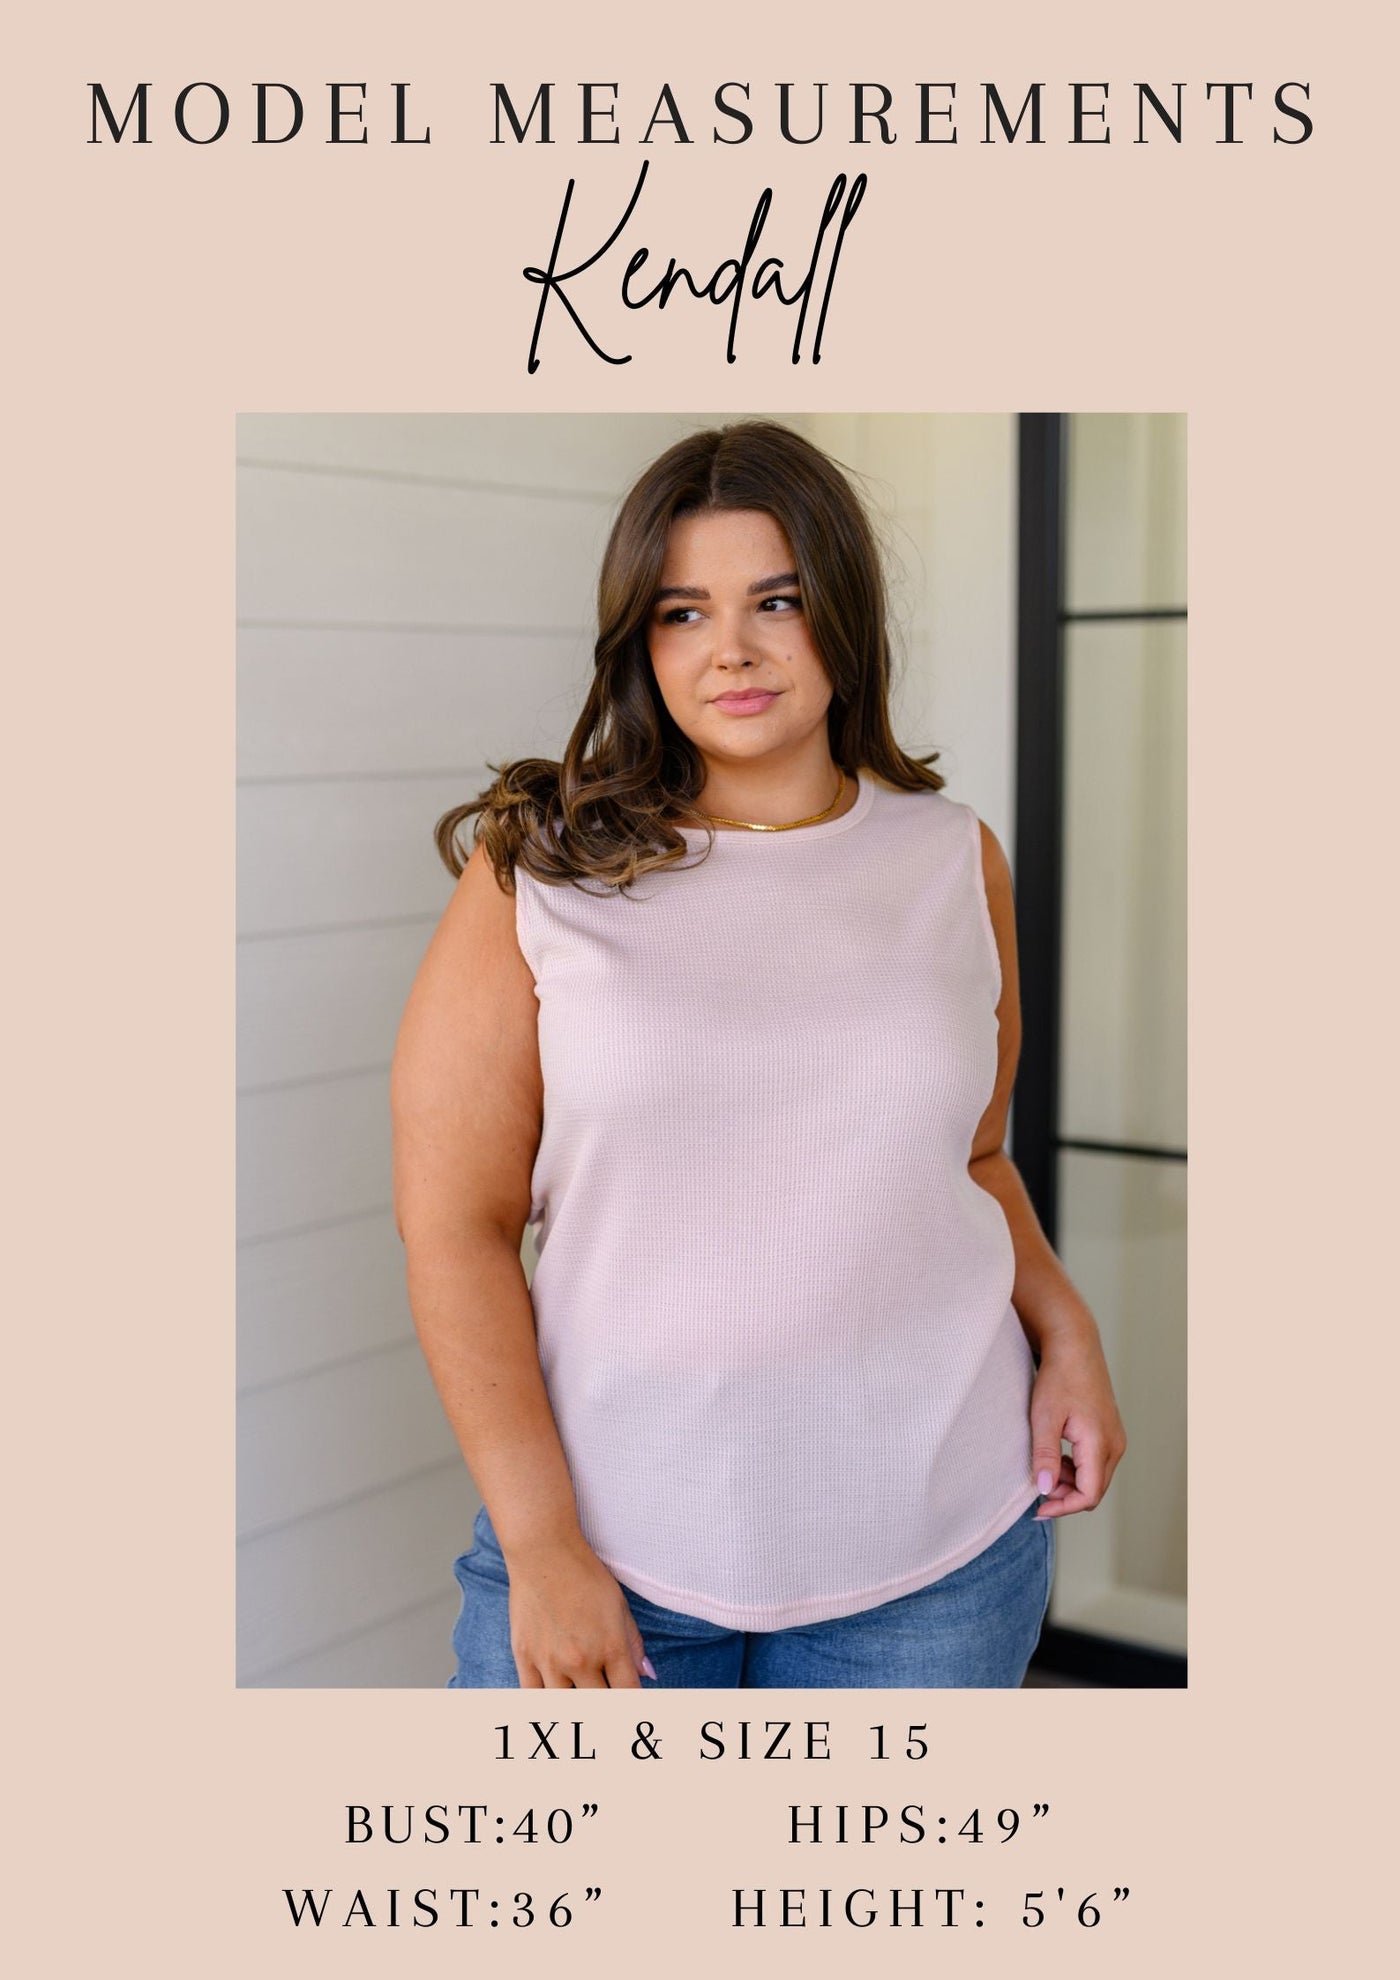 The Everyday Scoop Neck Short Sleeve Top is the perfect sleek and fitted base for any look